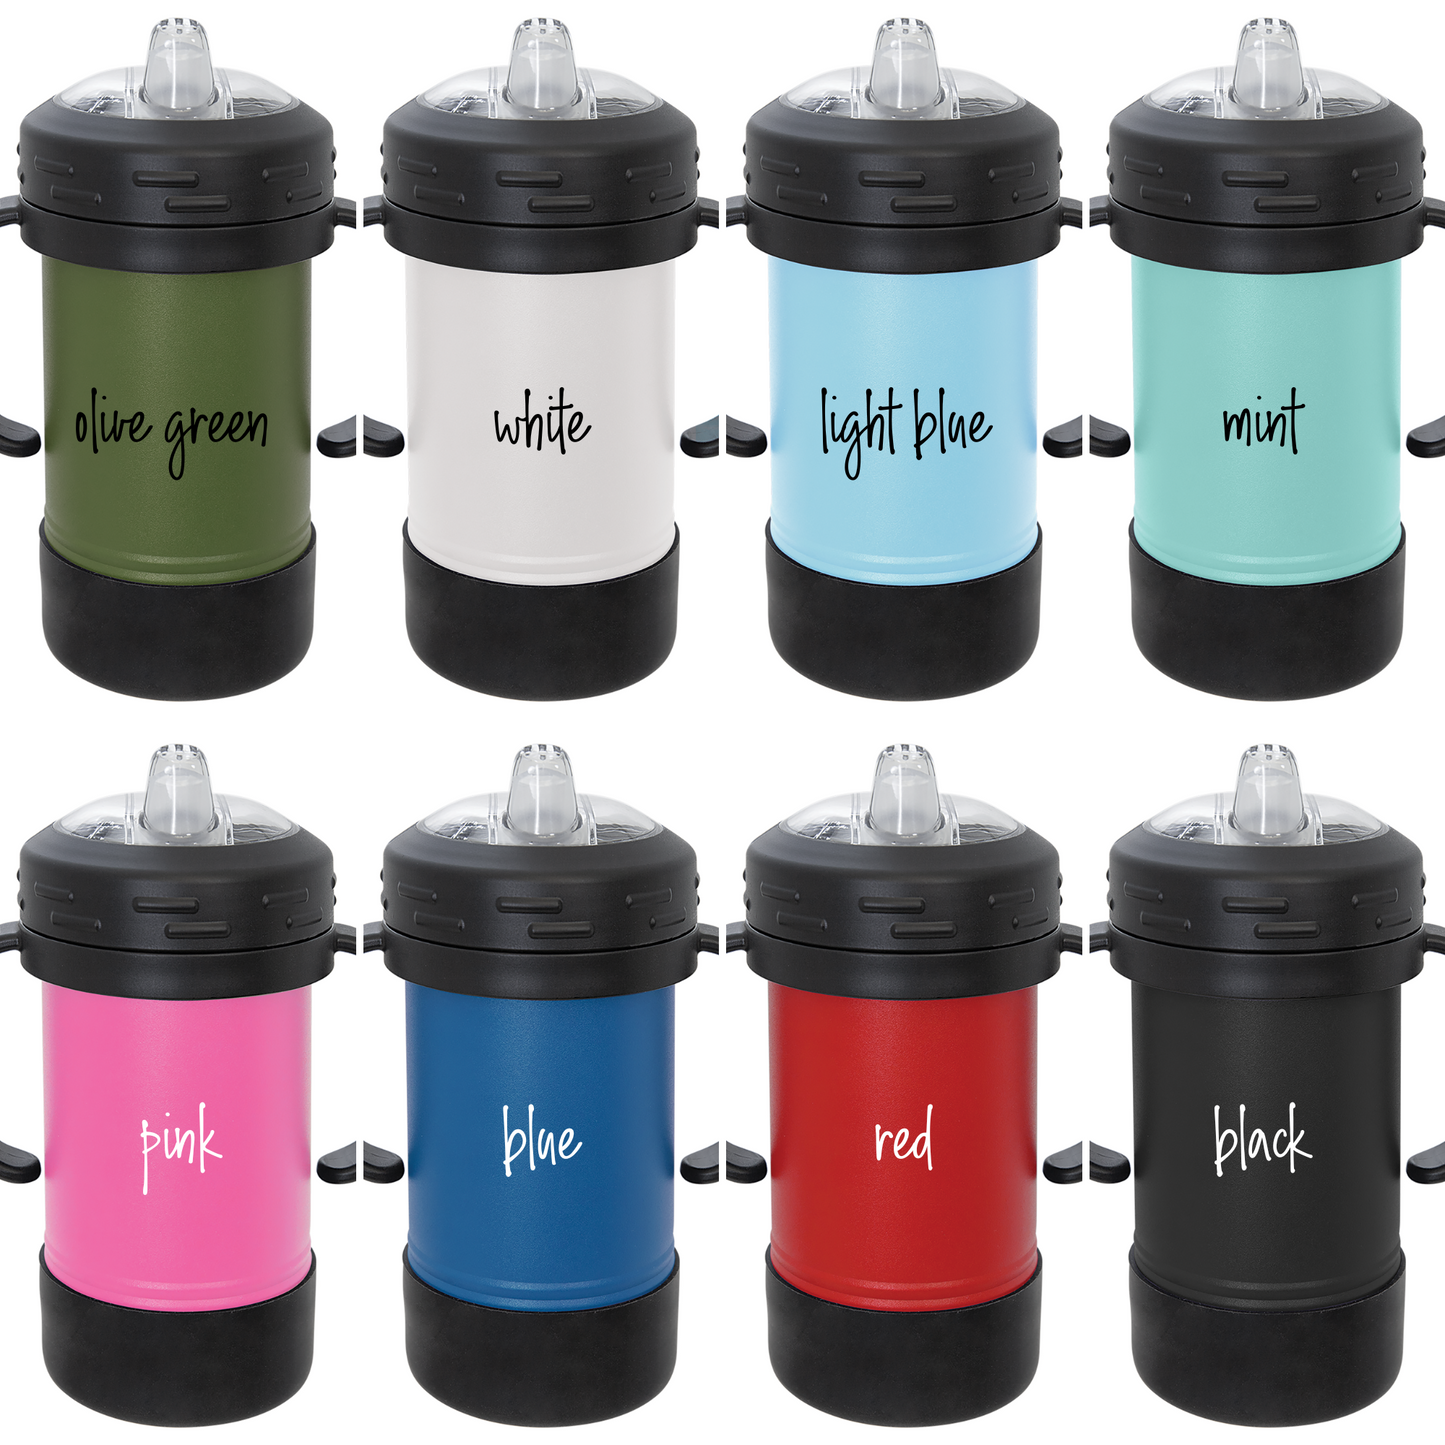 10 oz farm Sippy Cup ,Personalized kids Sippy cup